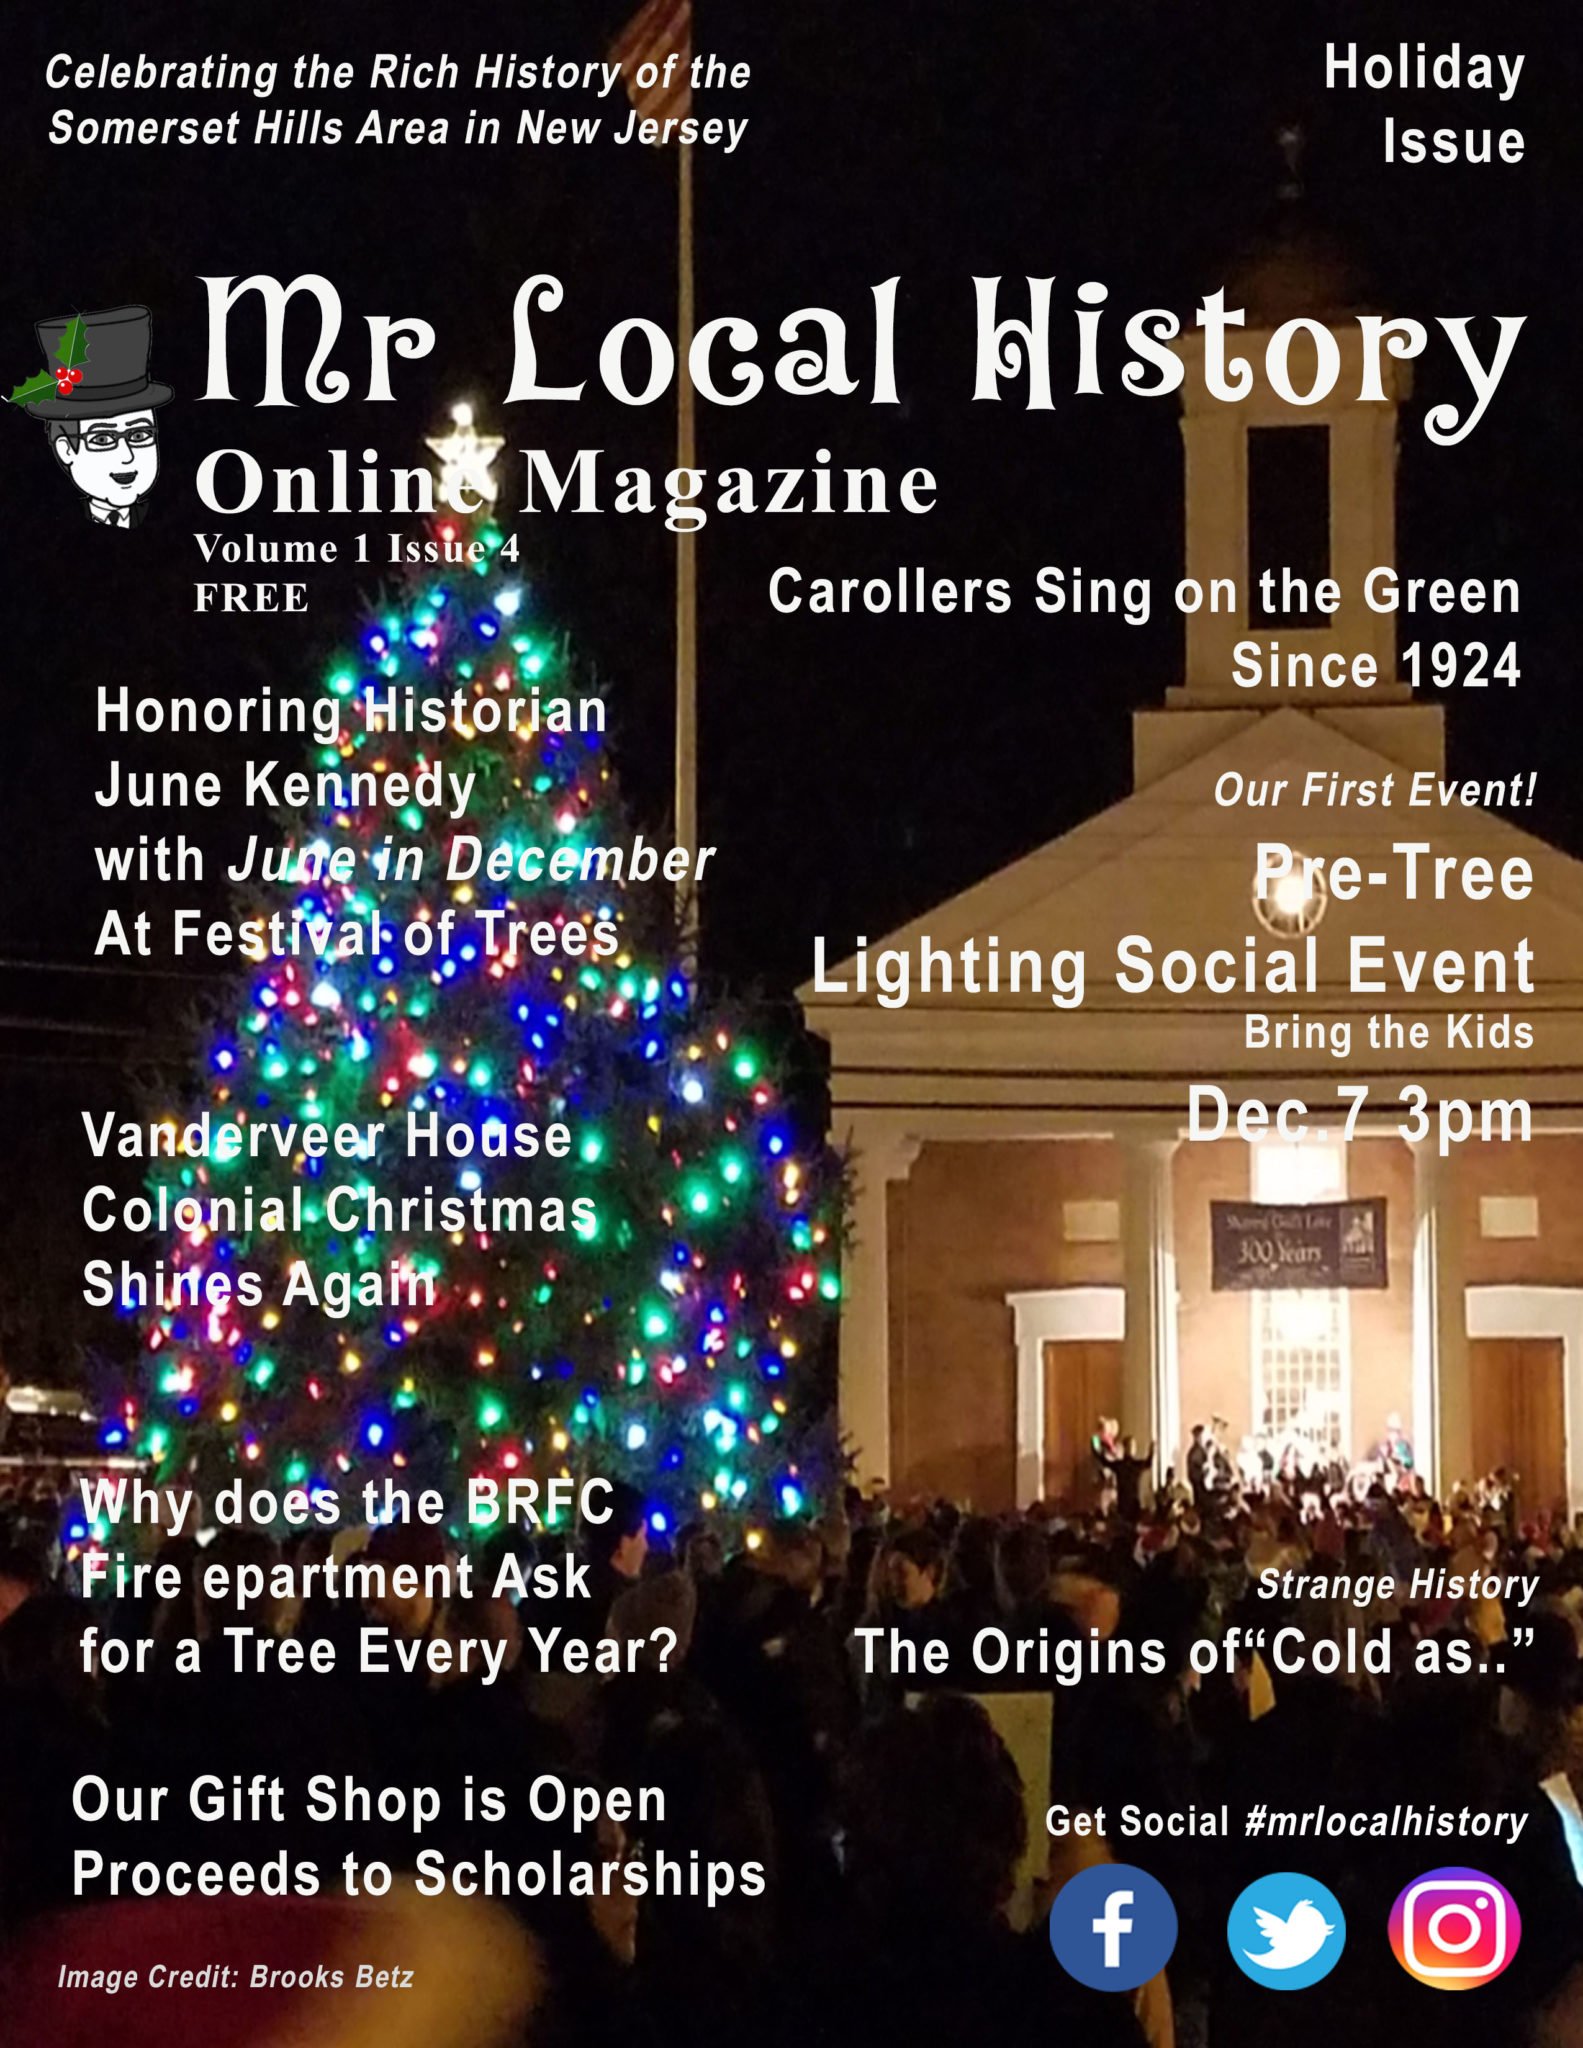 Our free Magazine - The Mr. Local History Holiday Edition